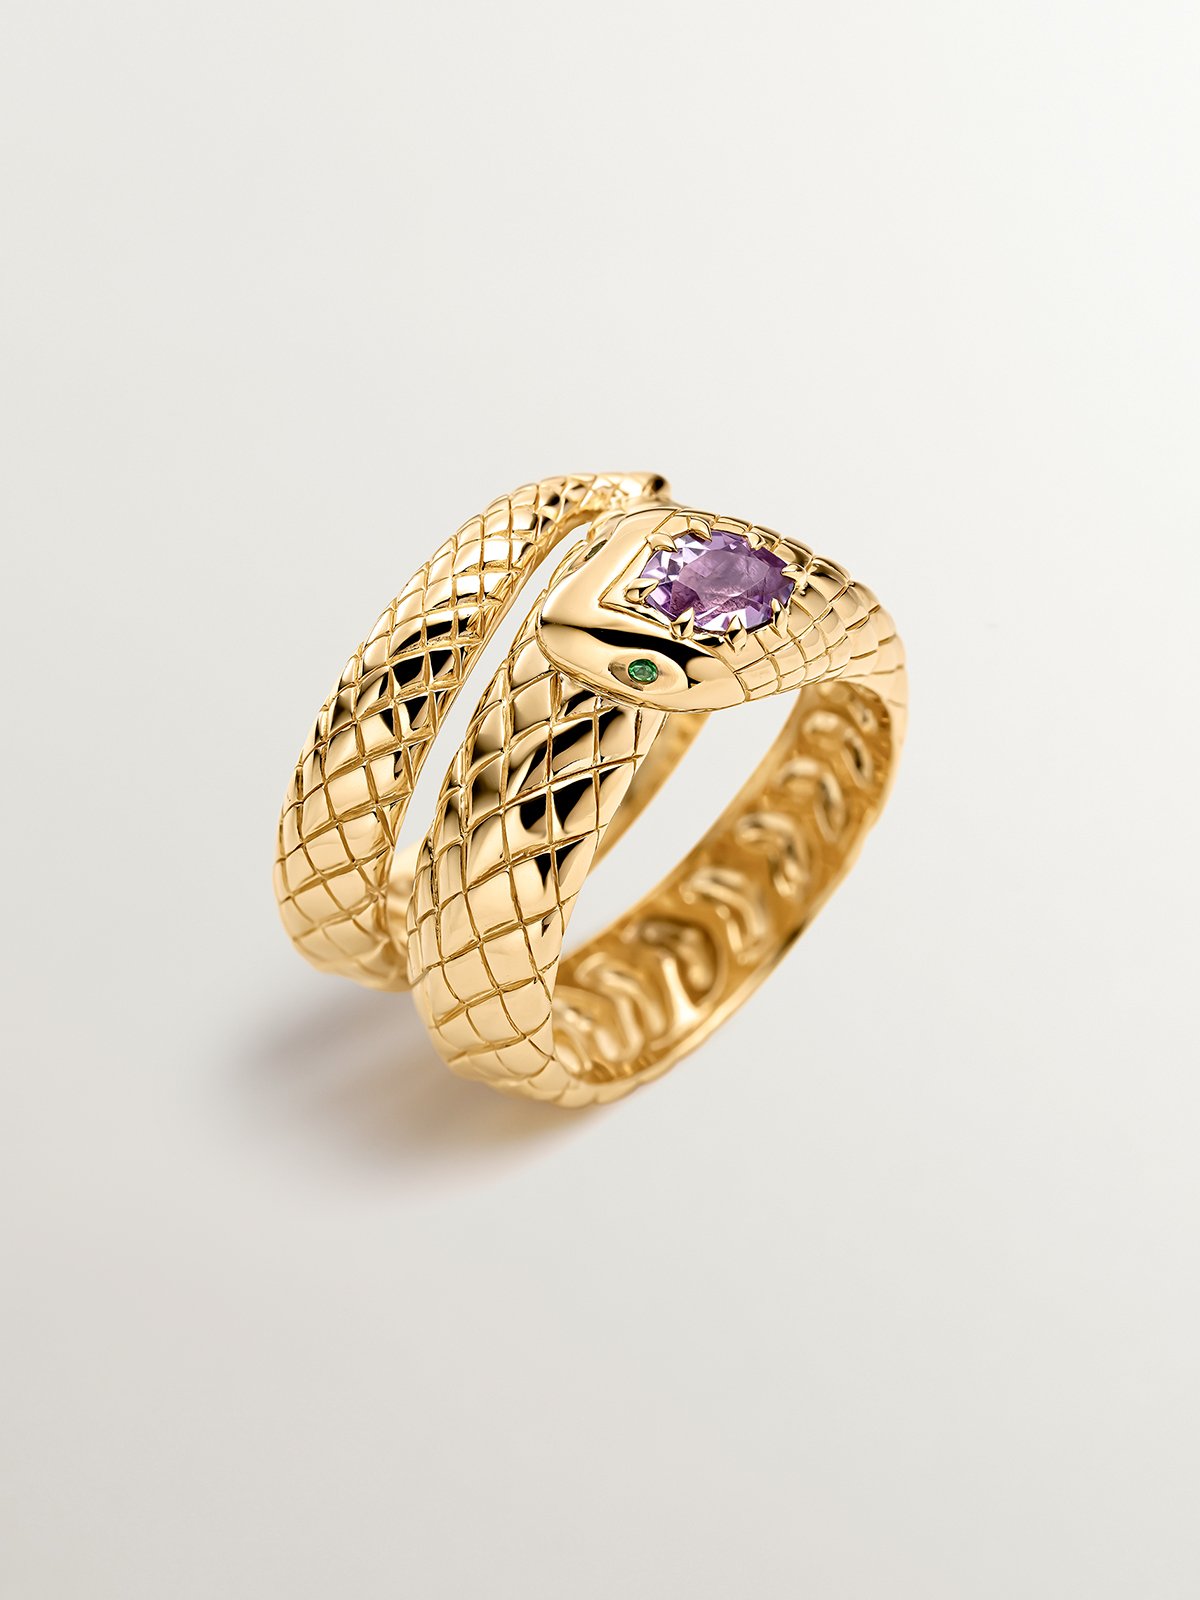 Wide 925 silver ring bathed in 18K yellow gold with a snake shape, purple amethyst and green tsavorites.